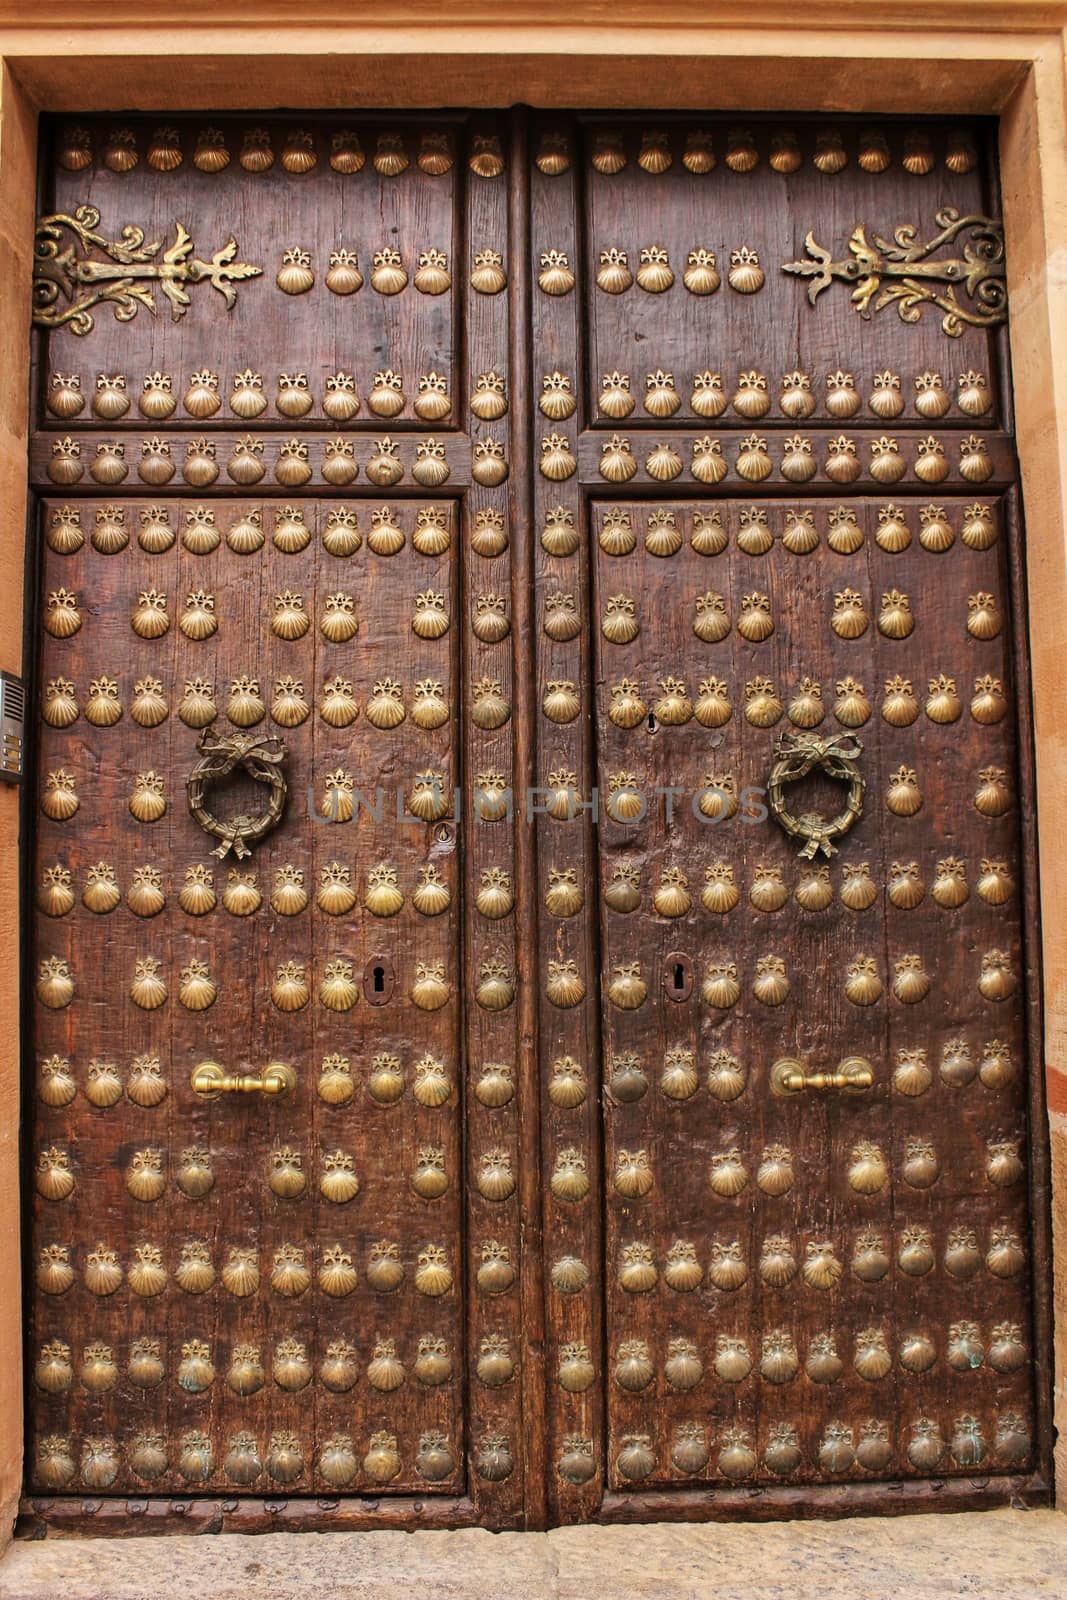 Old door with golden wrought iron details with figures of shells. Rusty and antique lock in the corner.